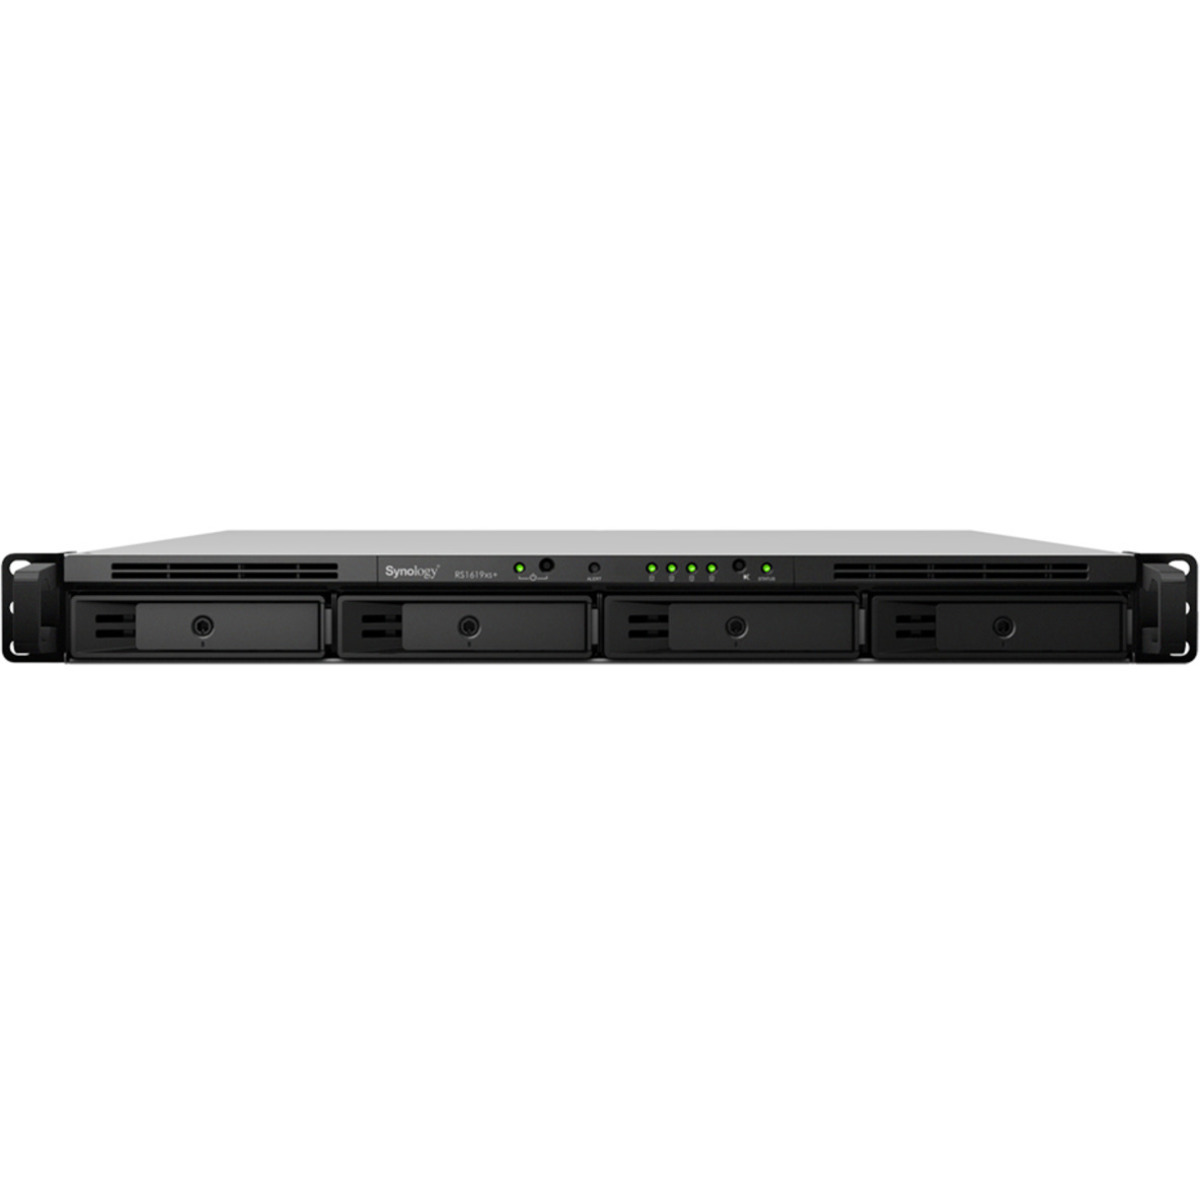 Synology RackStation RS1619xs+ 30tb 4-Bay RackMount Multimedia / Power User / Business NAS - Network Attached Storage Device 3x10tb Seagate IronWolf Pro ST10000NT001 3.5 7200rpm SATA 6Gb/s HDD NAS Class Drives Installed - Burn-In Tested - ON SALE RackStation RS1619xs+